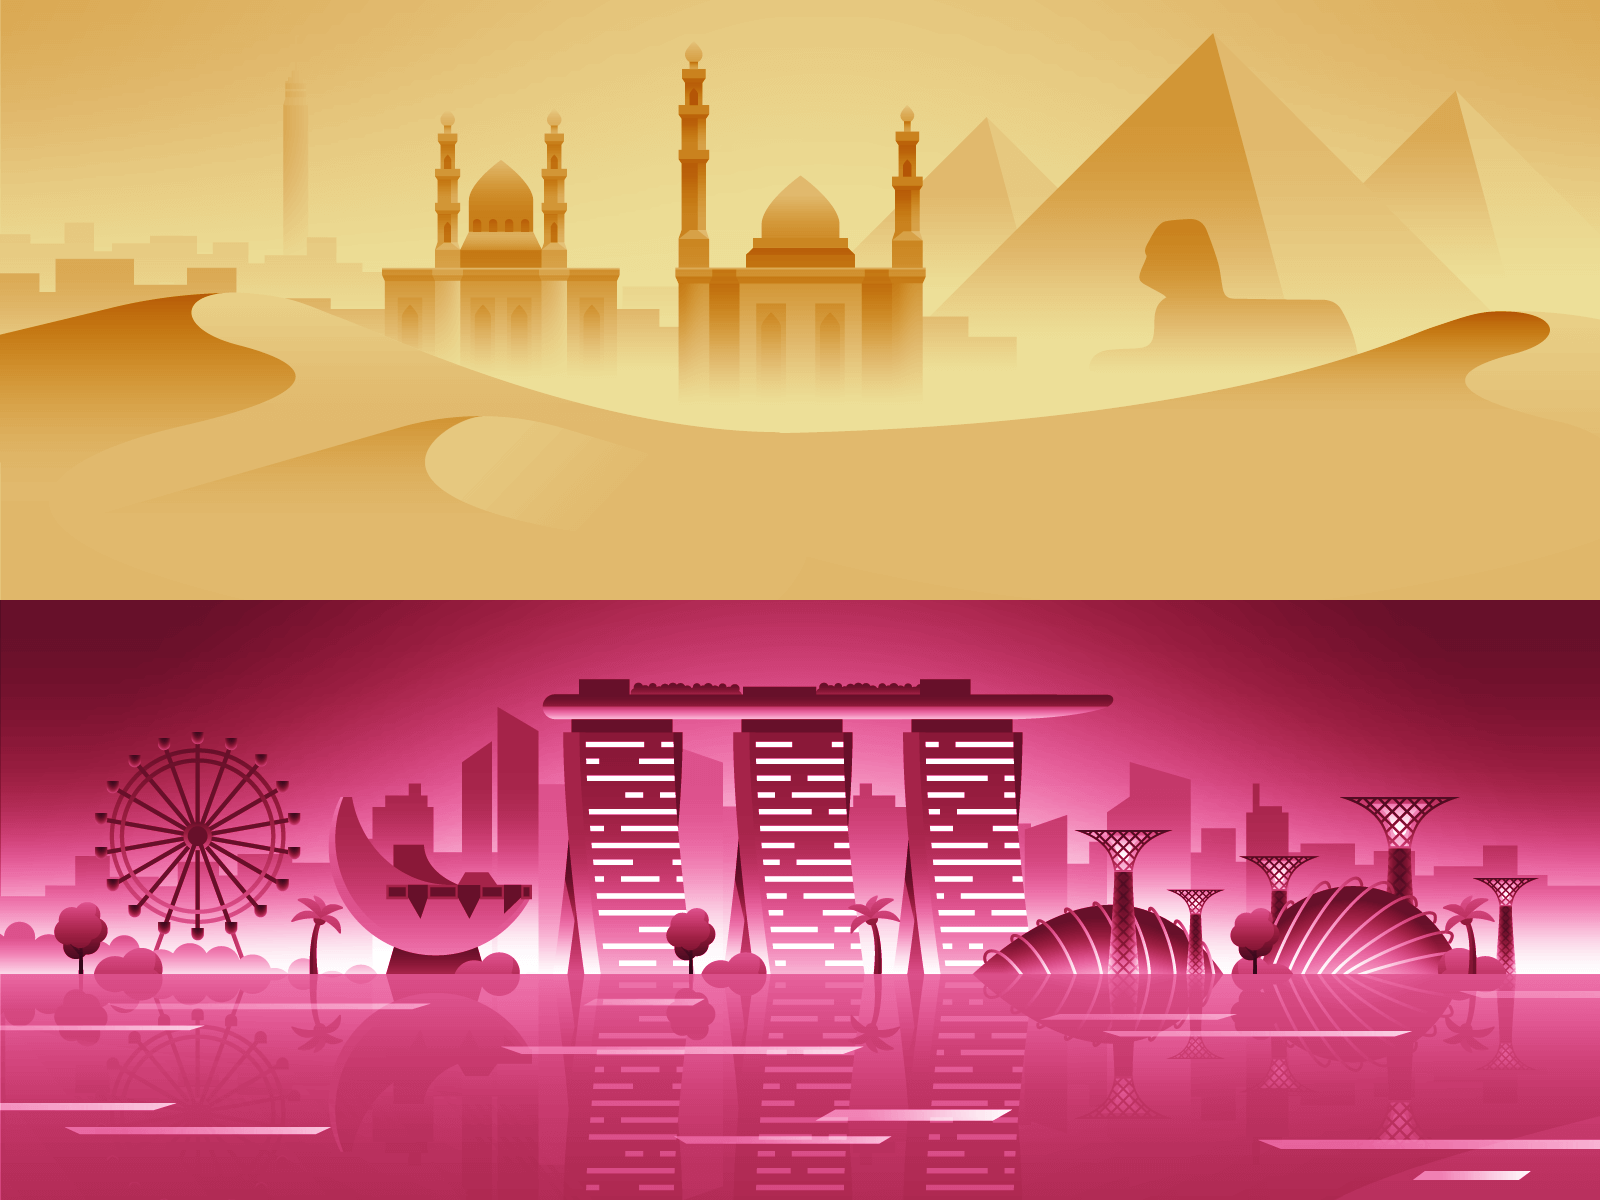 Singapore and Cairo cities illustrated